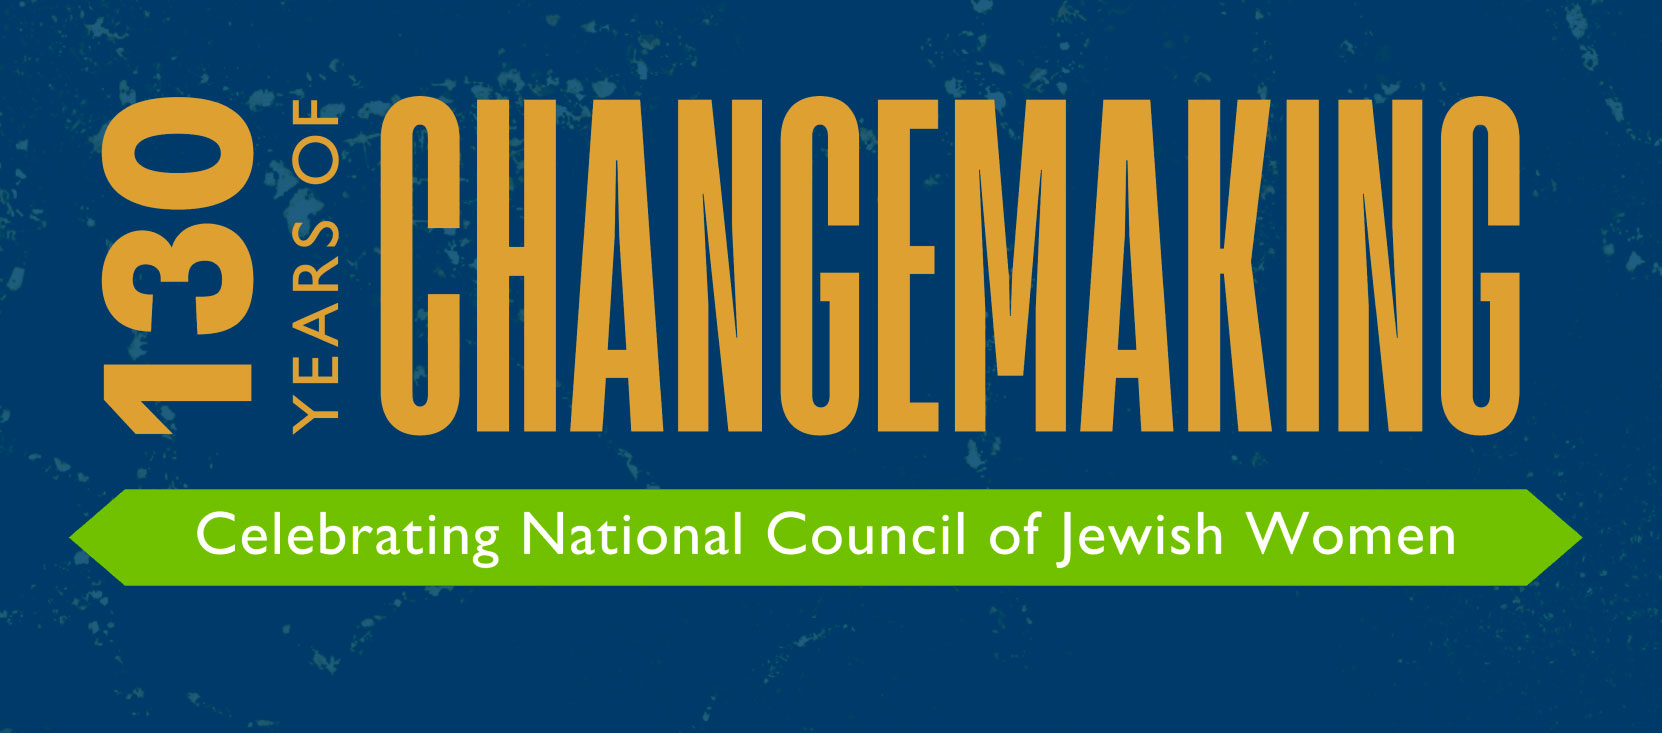 130 Years of Changemaking | National Council of Jewish Women